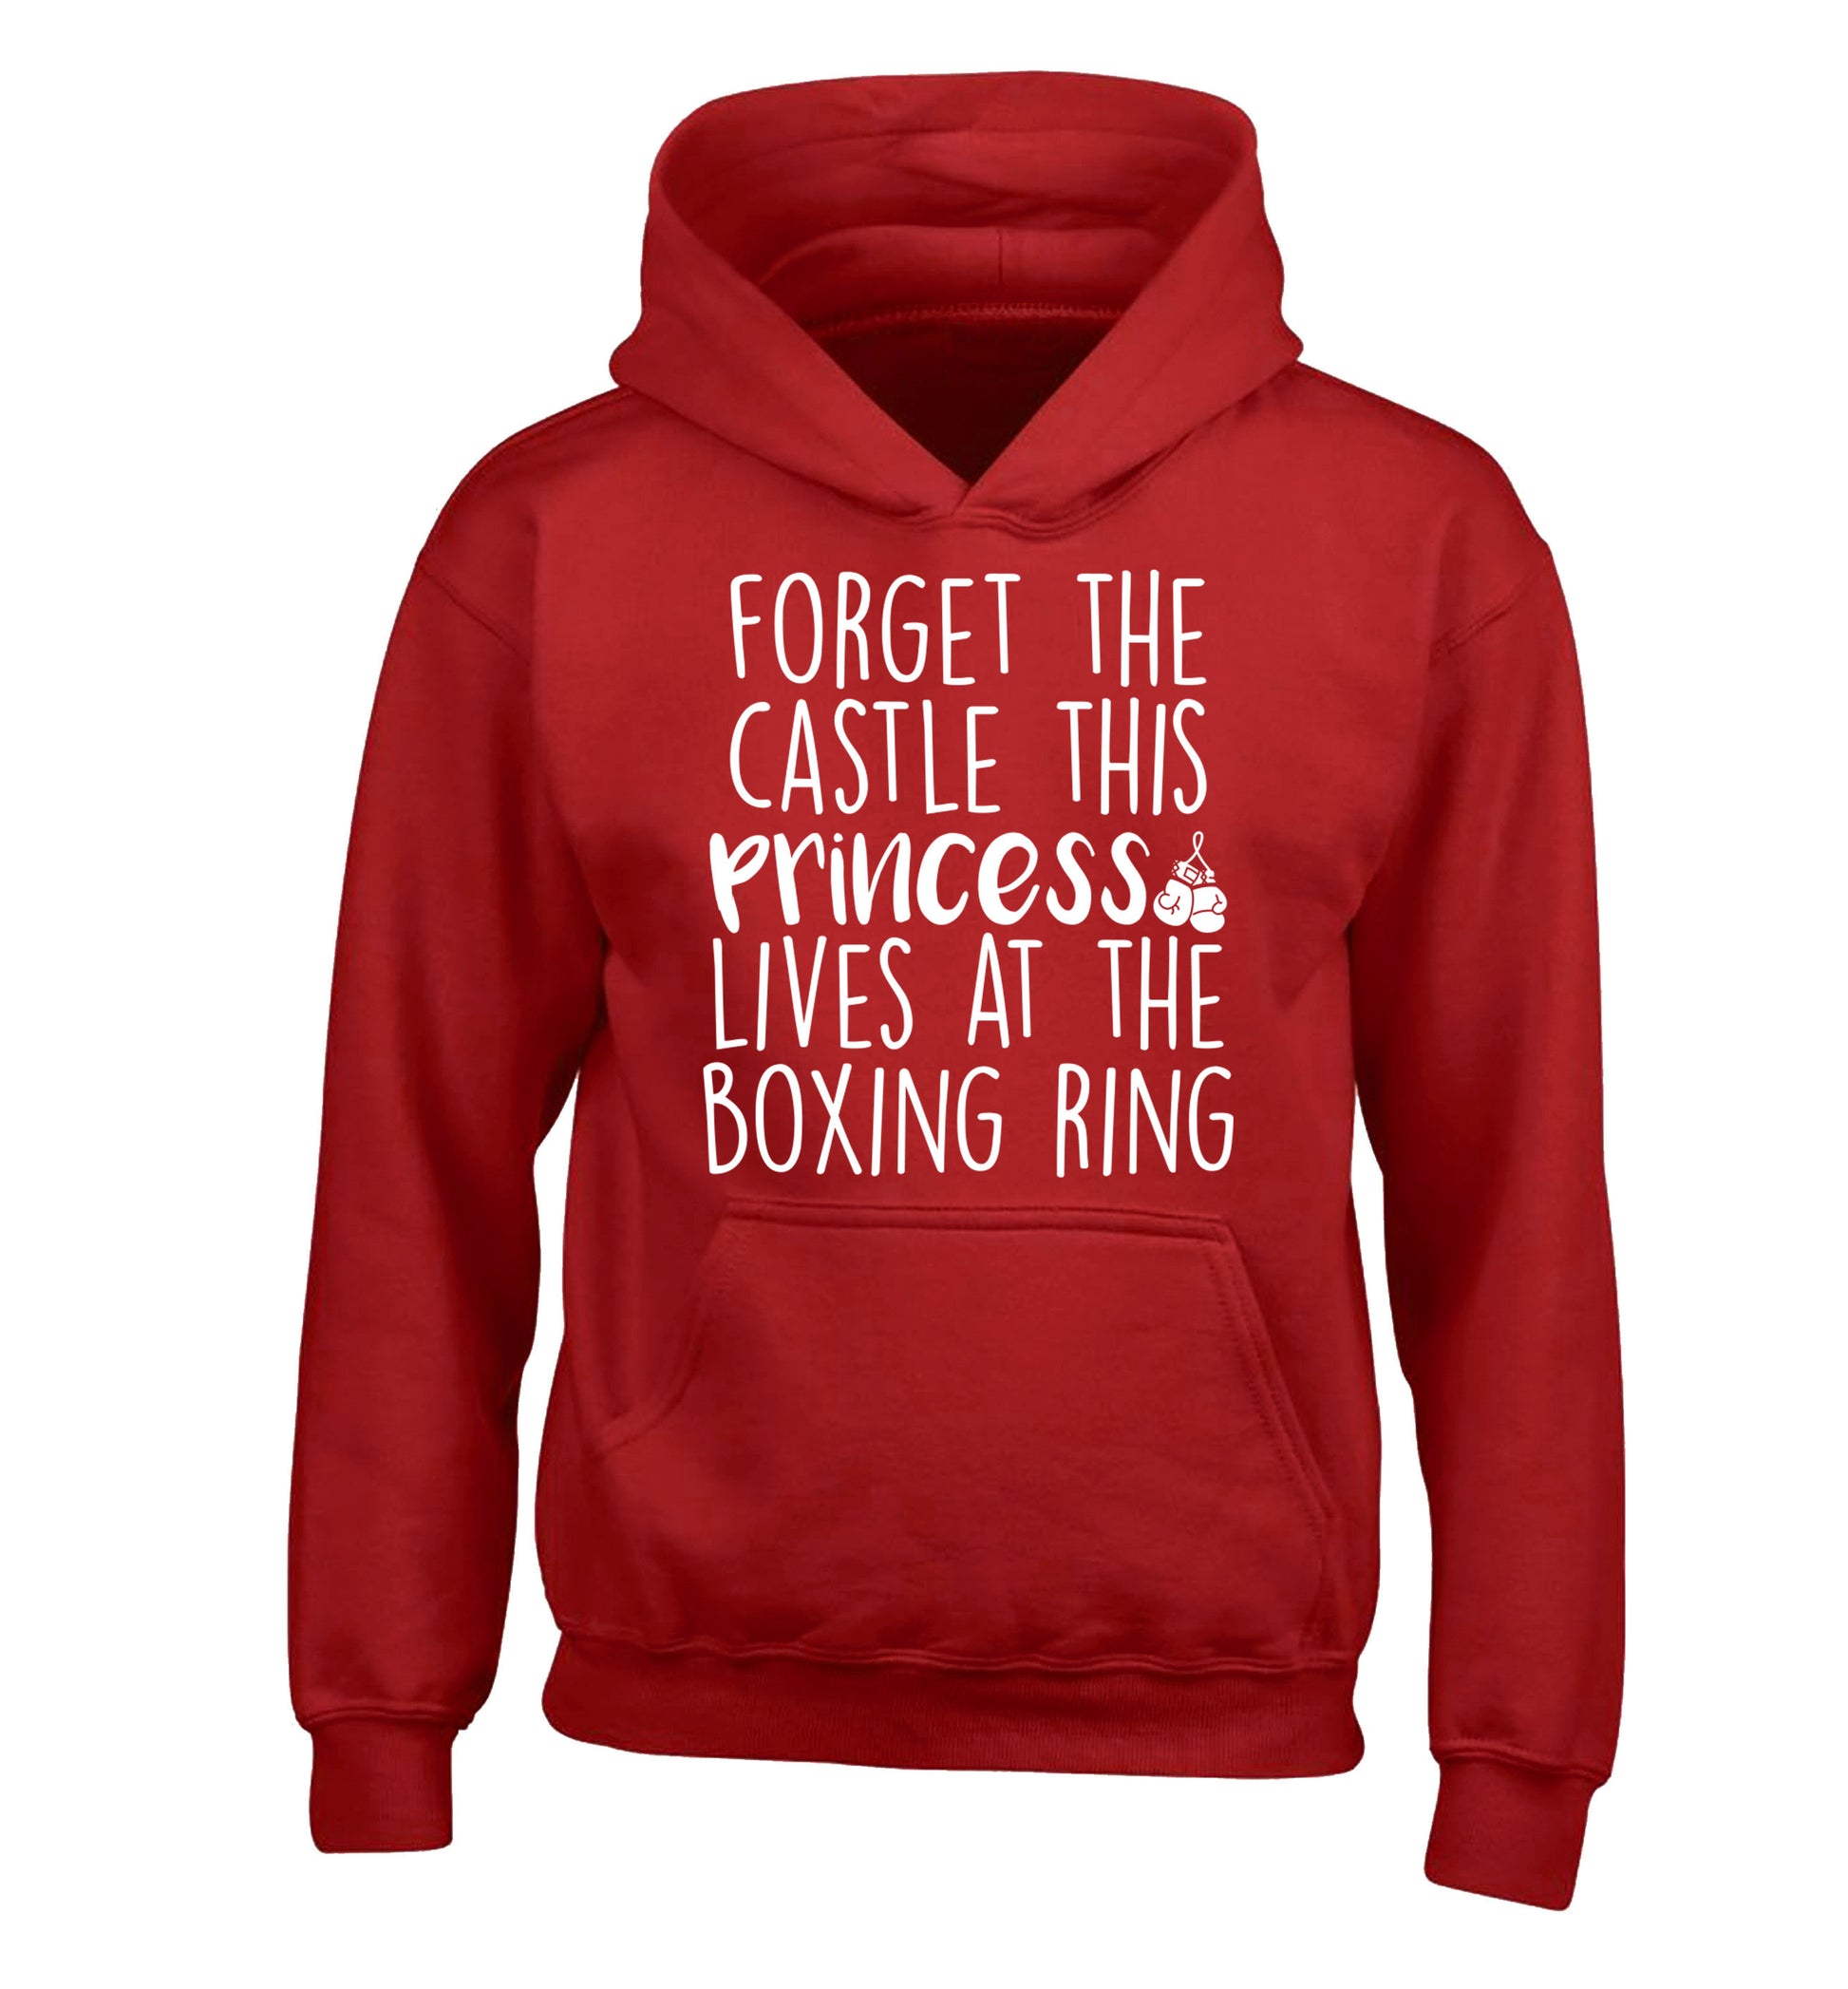 Forget the castle this princess lives at the boxing ring children's red hoodie 12-14 Years